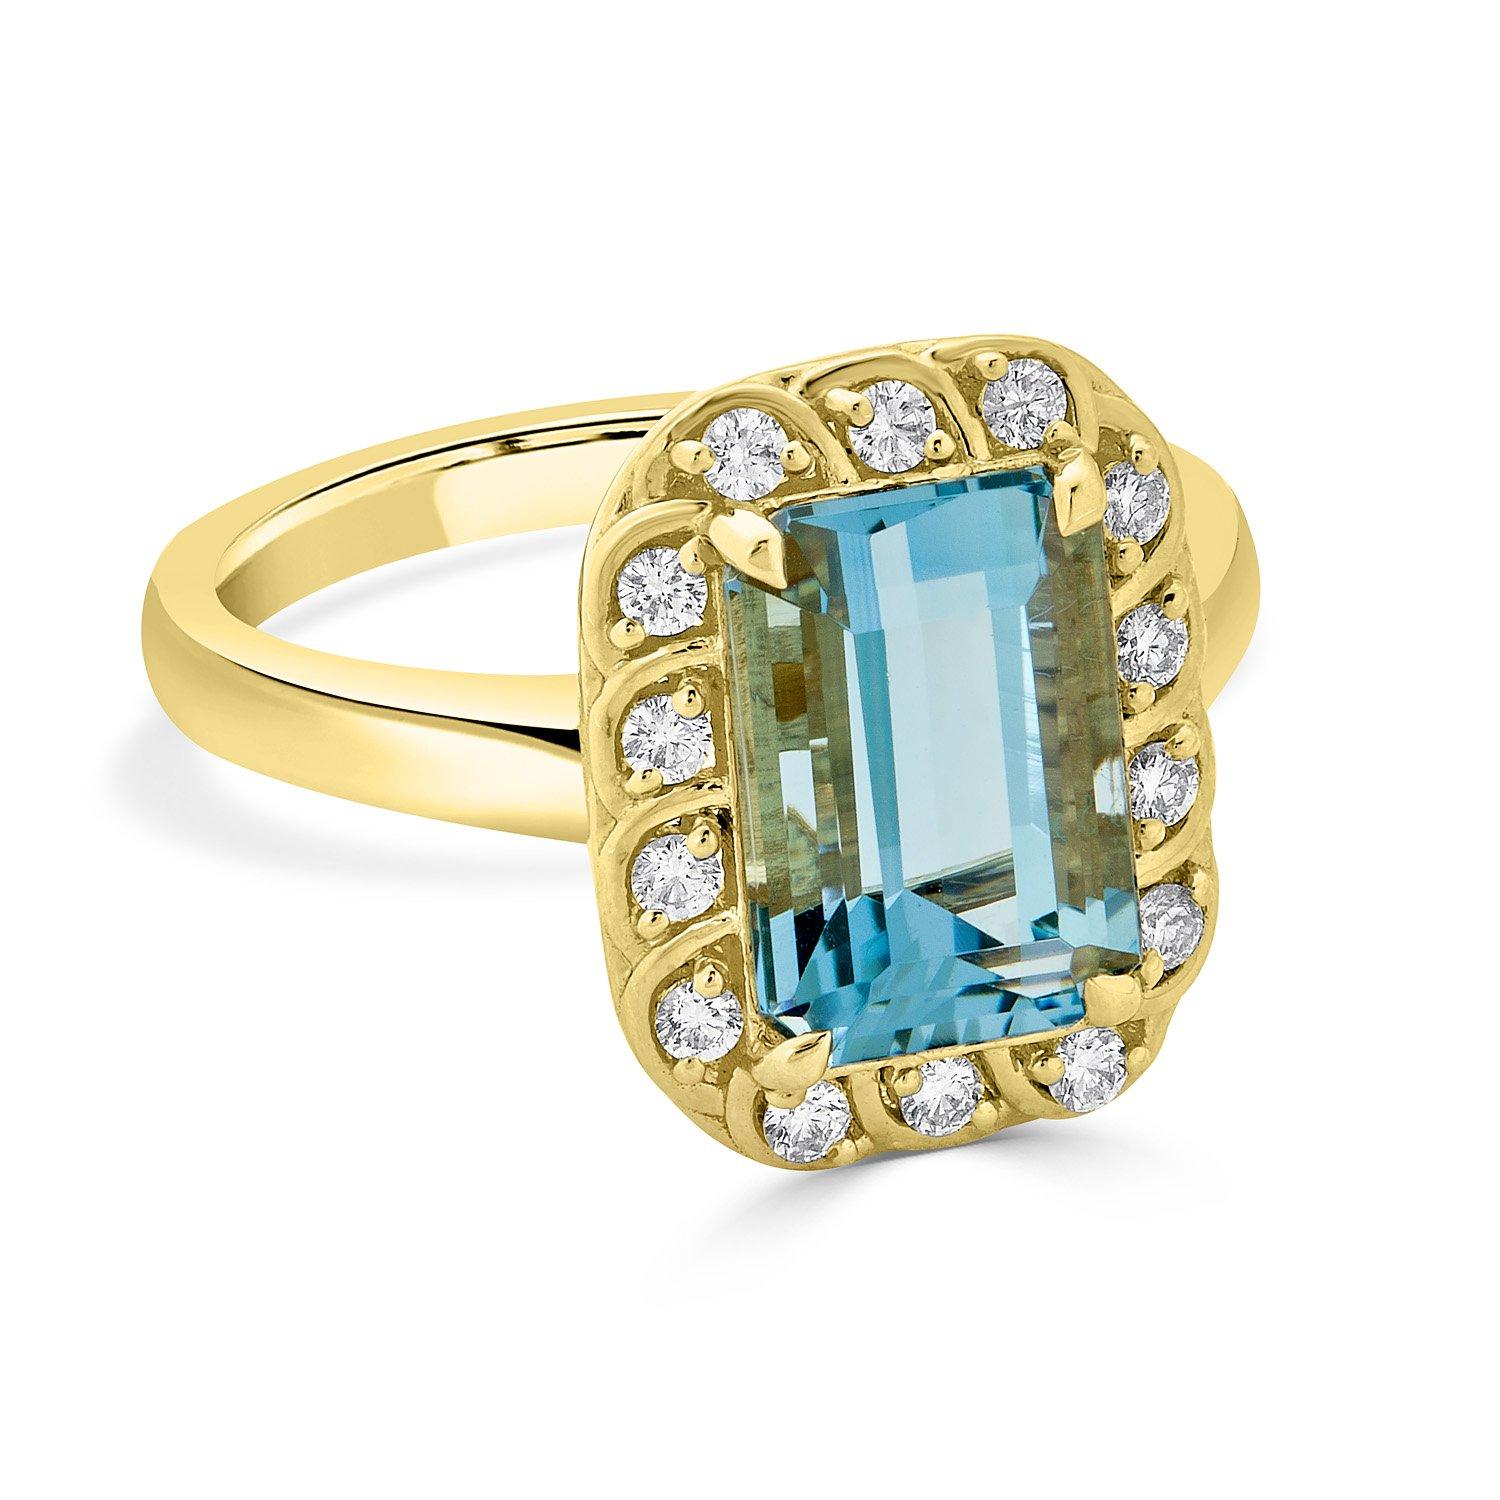 Introducing our exquisite 3.03ct Aquamarine Ring with 0.23tct Diamonds Set in 14k Yellow Gold - the perfect piece of jewelry to add a touch of elegance and sophistication to any outfit.

Crafted with precision and care, this stunning ring features a